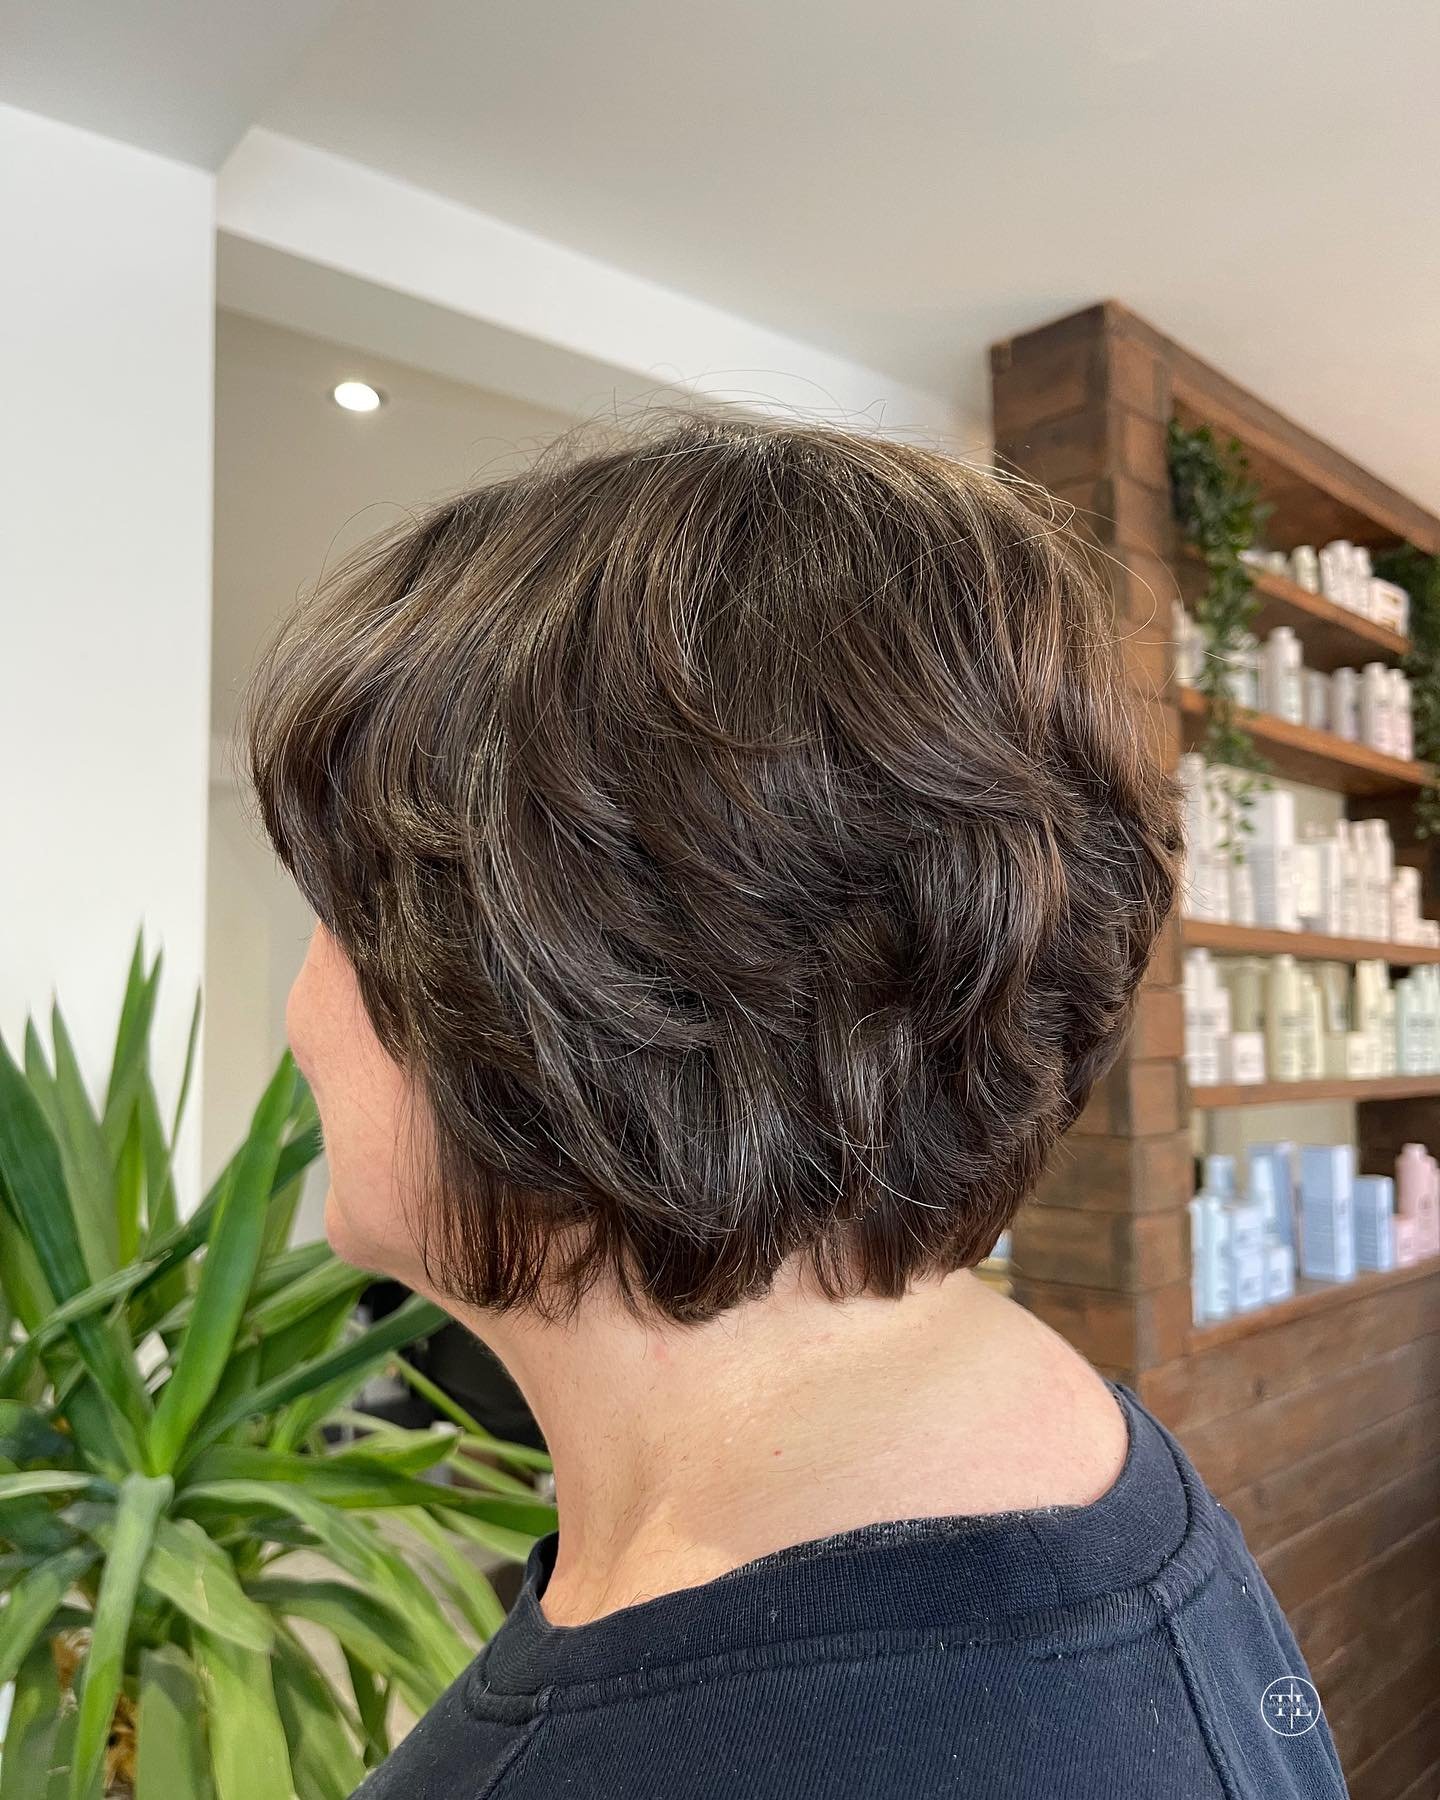 We did some short haircut training with @hairbysinead and she created this beautiful textured cut 😍

@authenticbeautyconcept @ghdhair @akitoscissors